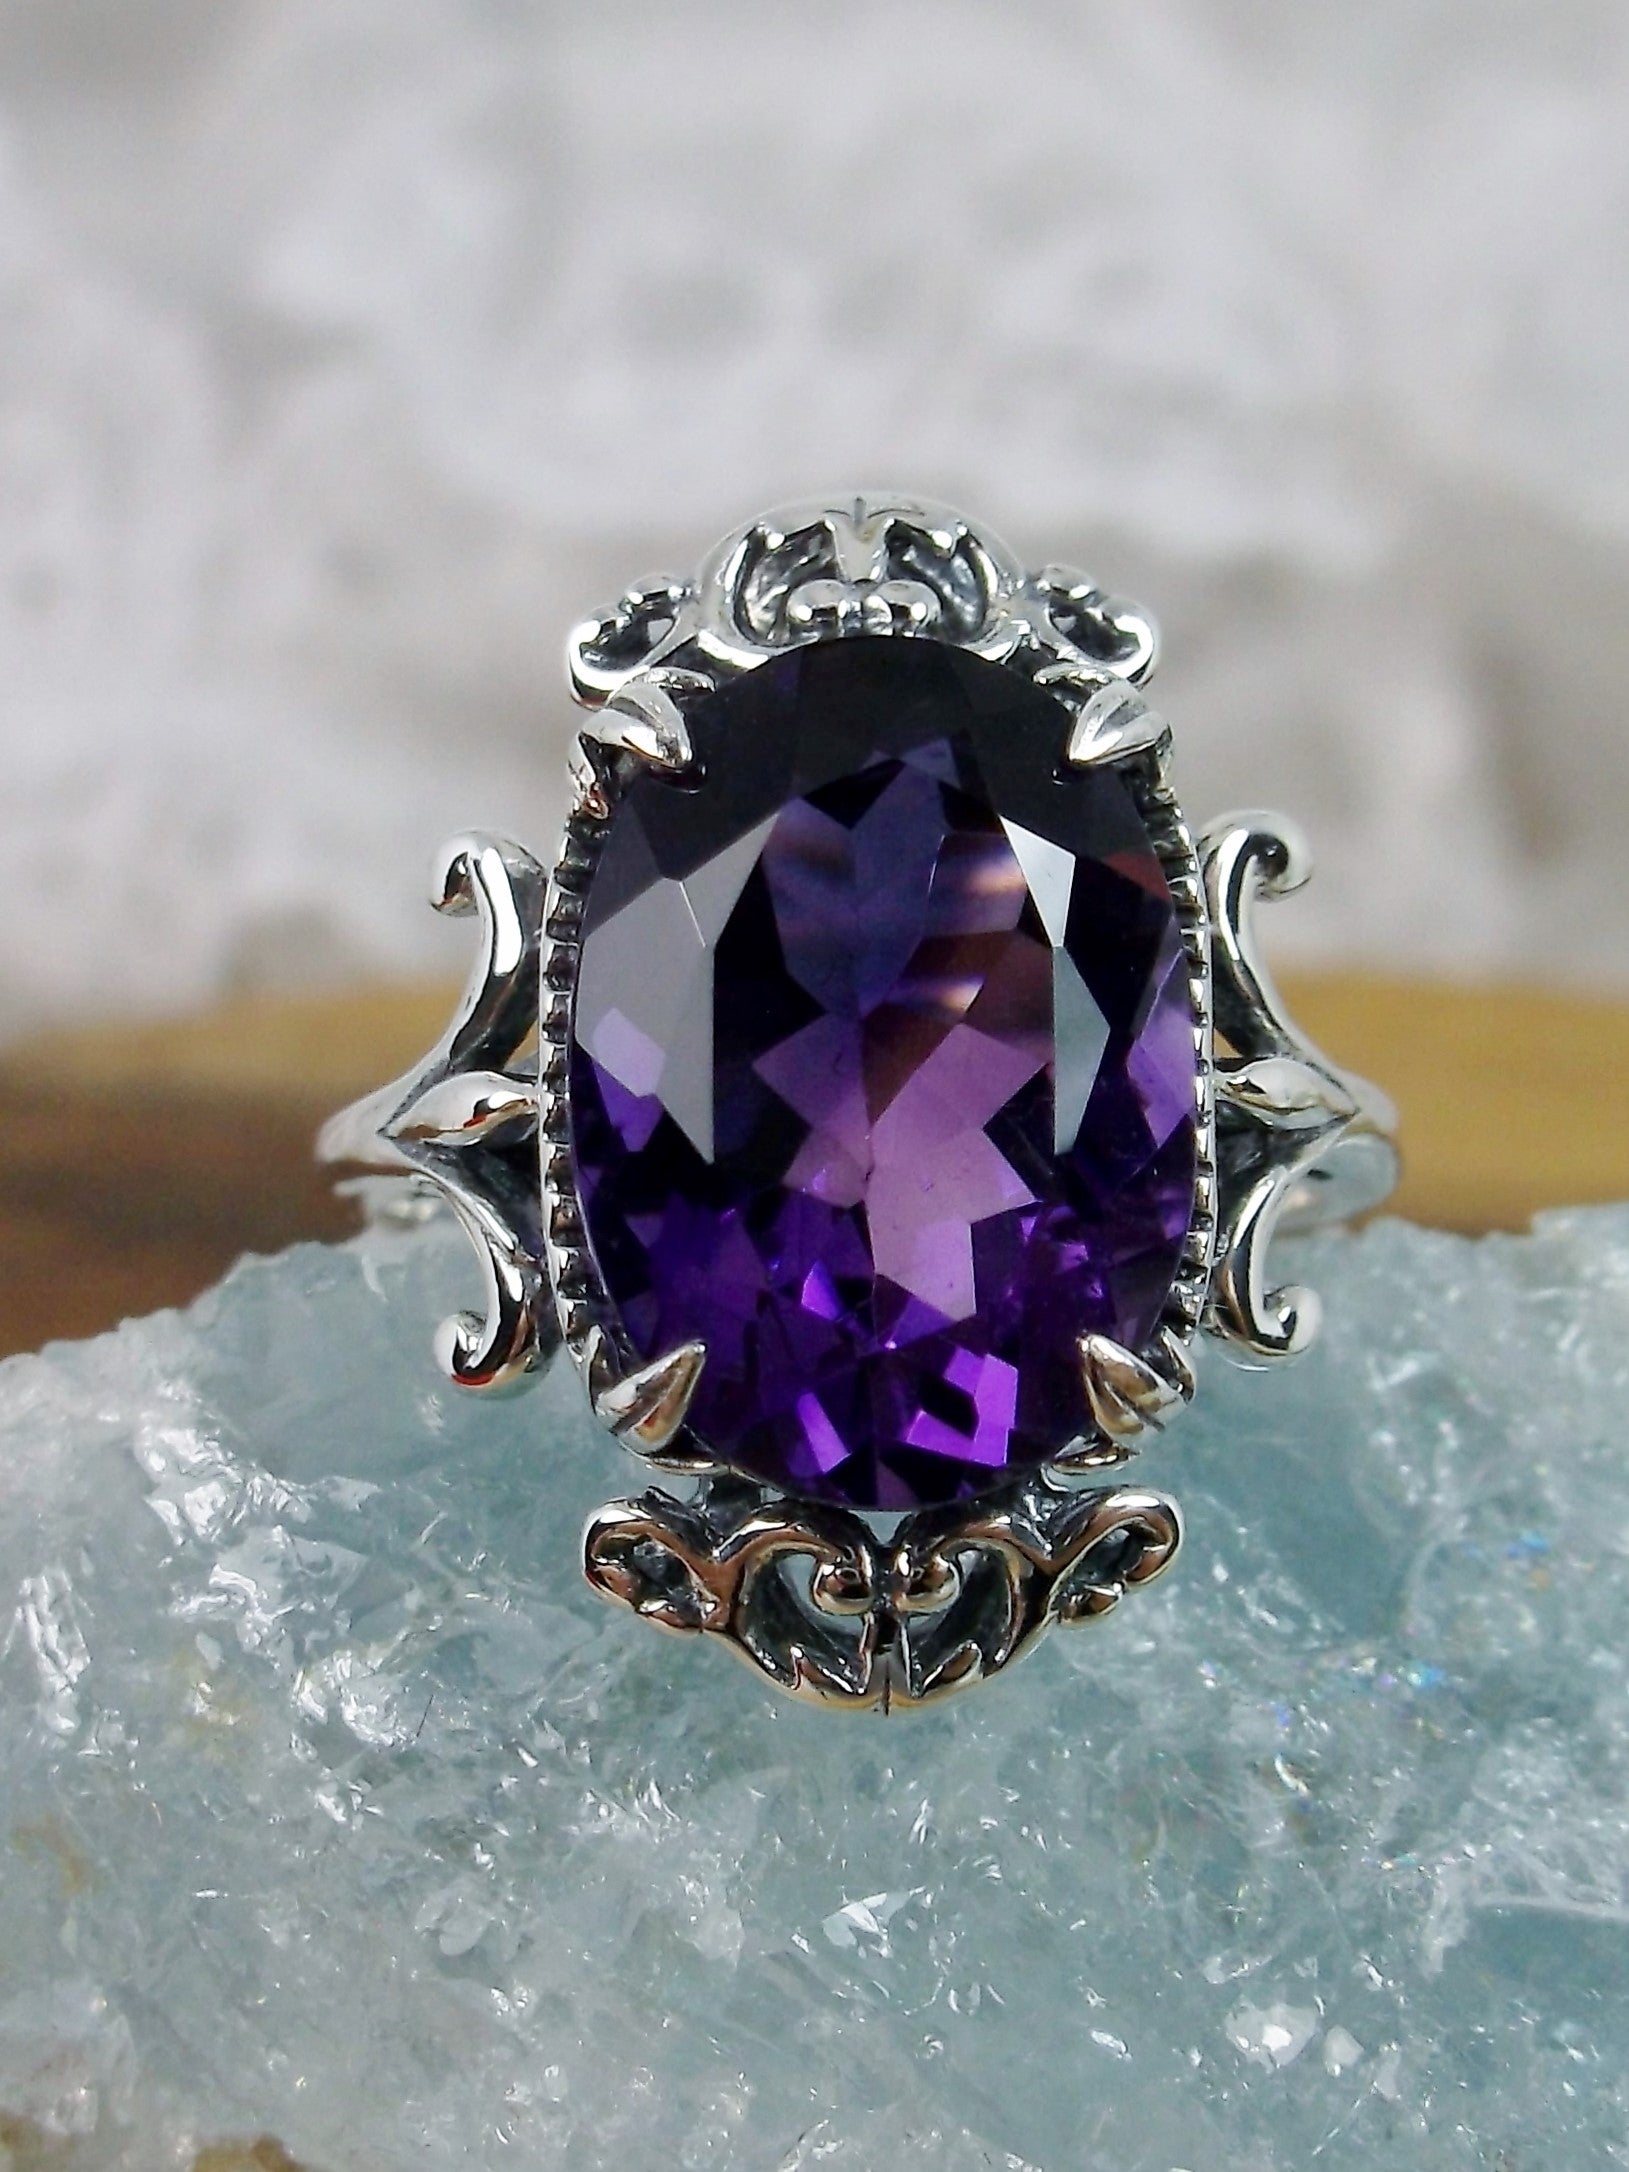 Stunning Amethyst Gemstone Solitaire Ring in 14k Solid Gold